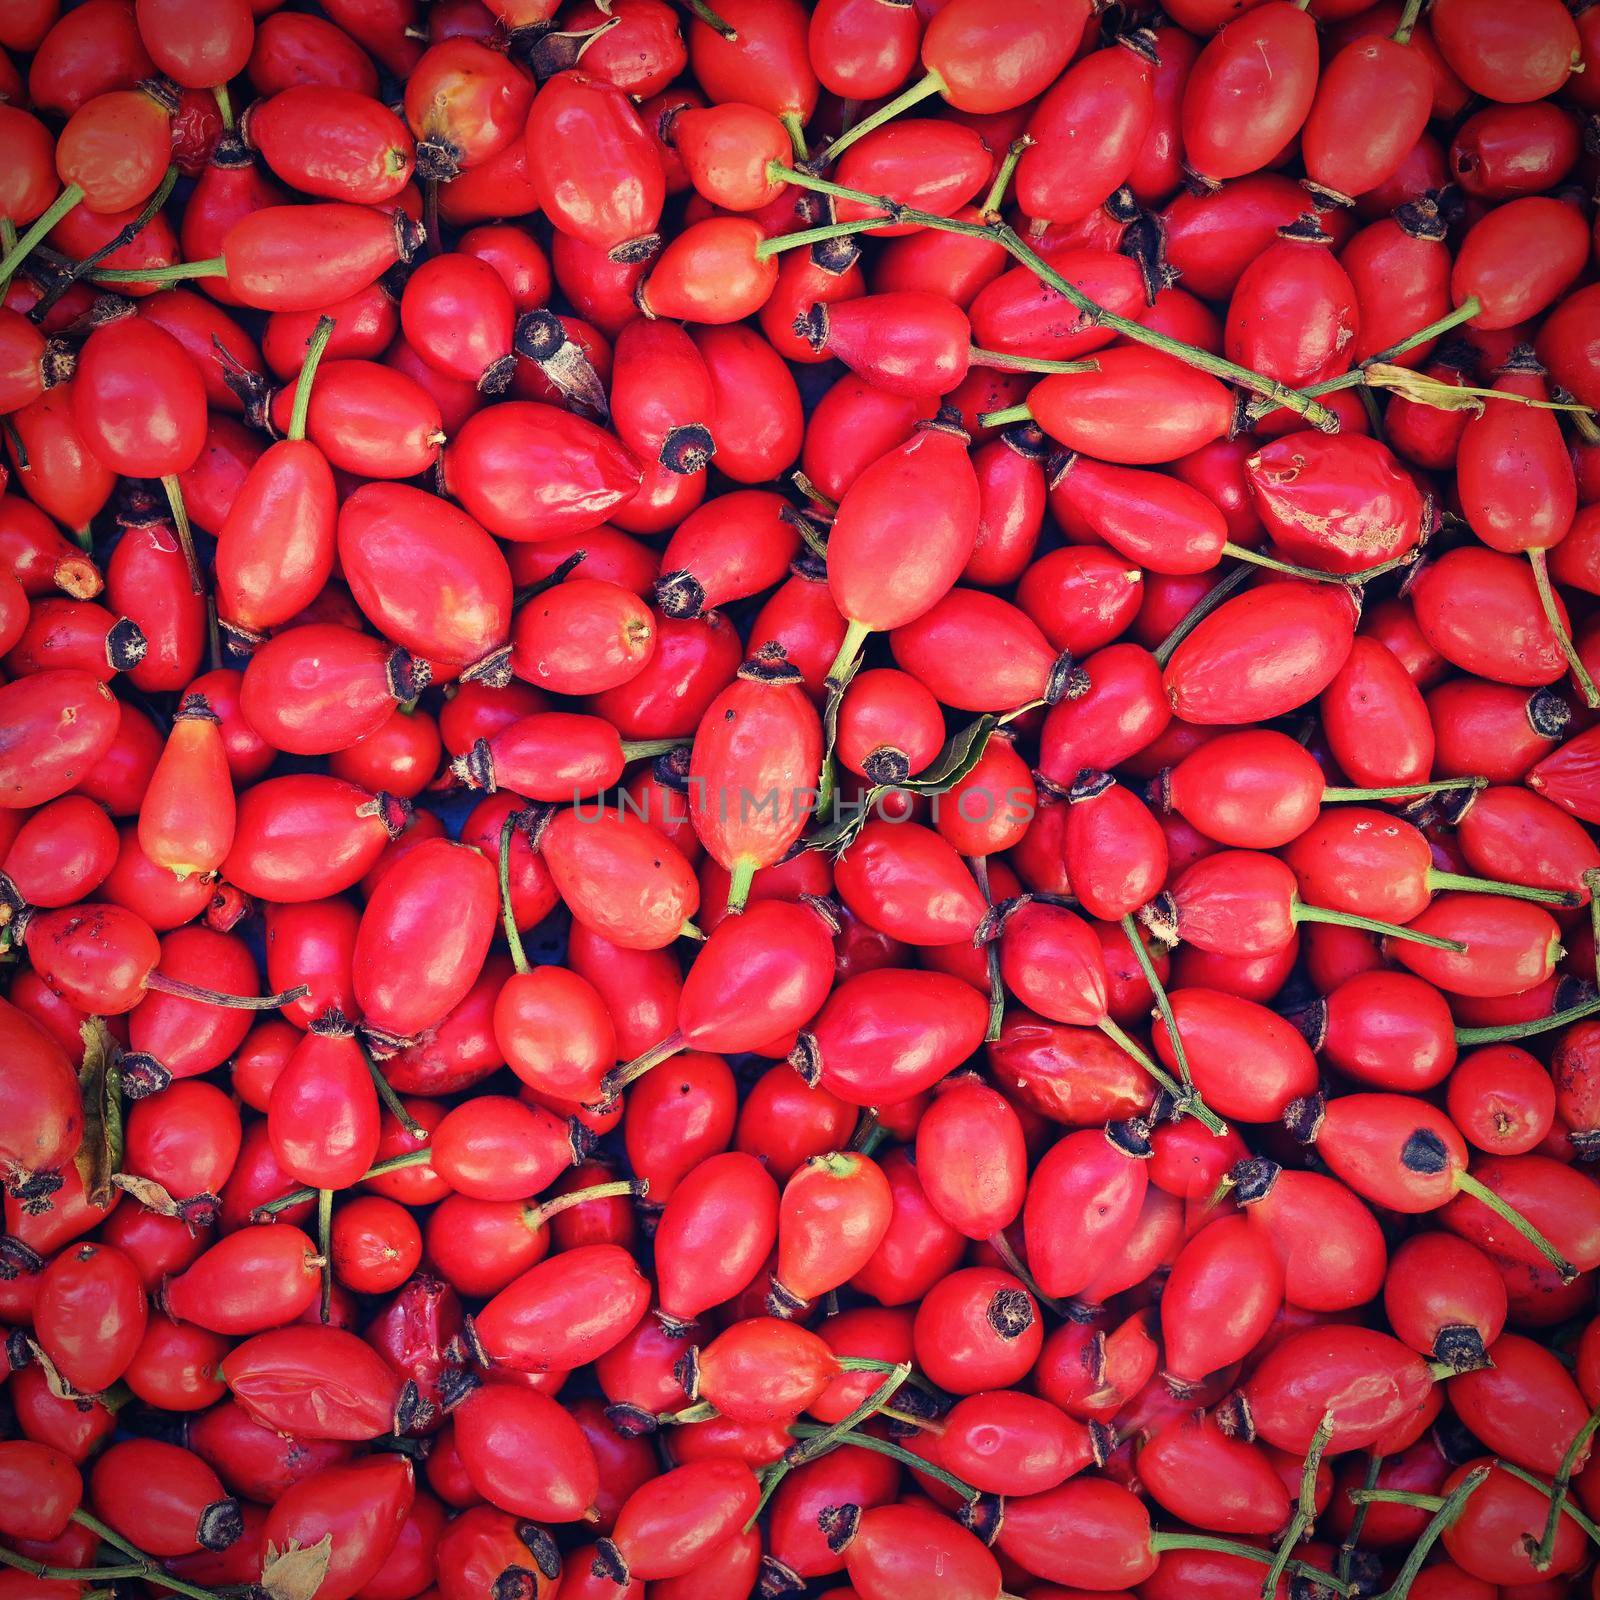 Rosehip bushes. Healthy fresh red autumn fruits from nature. by Montypeter